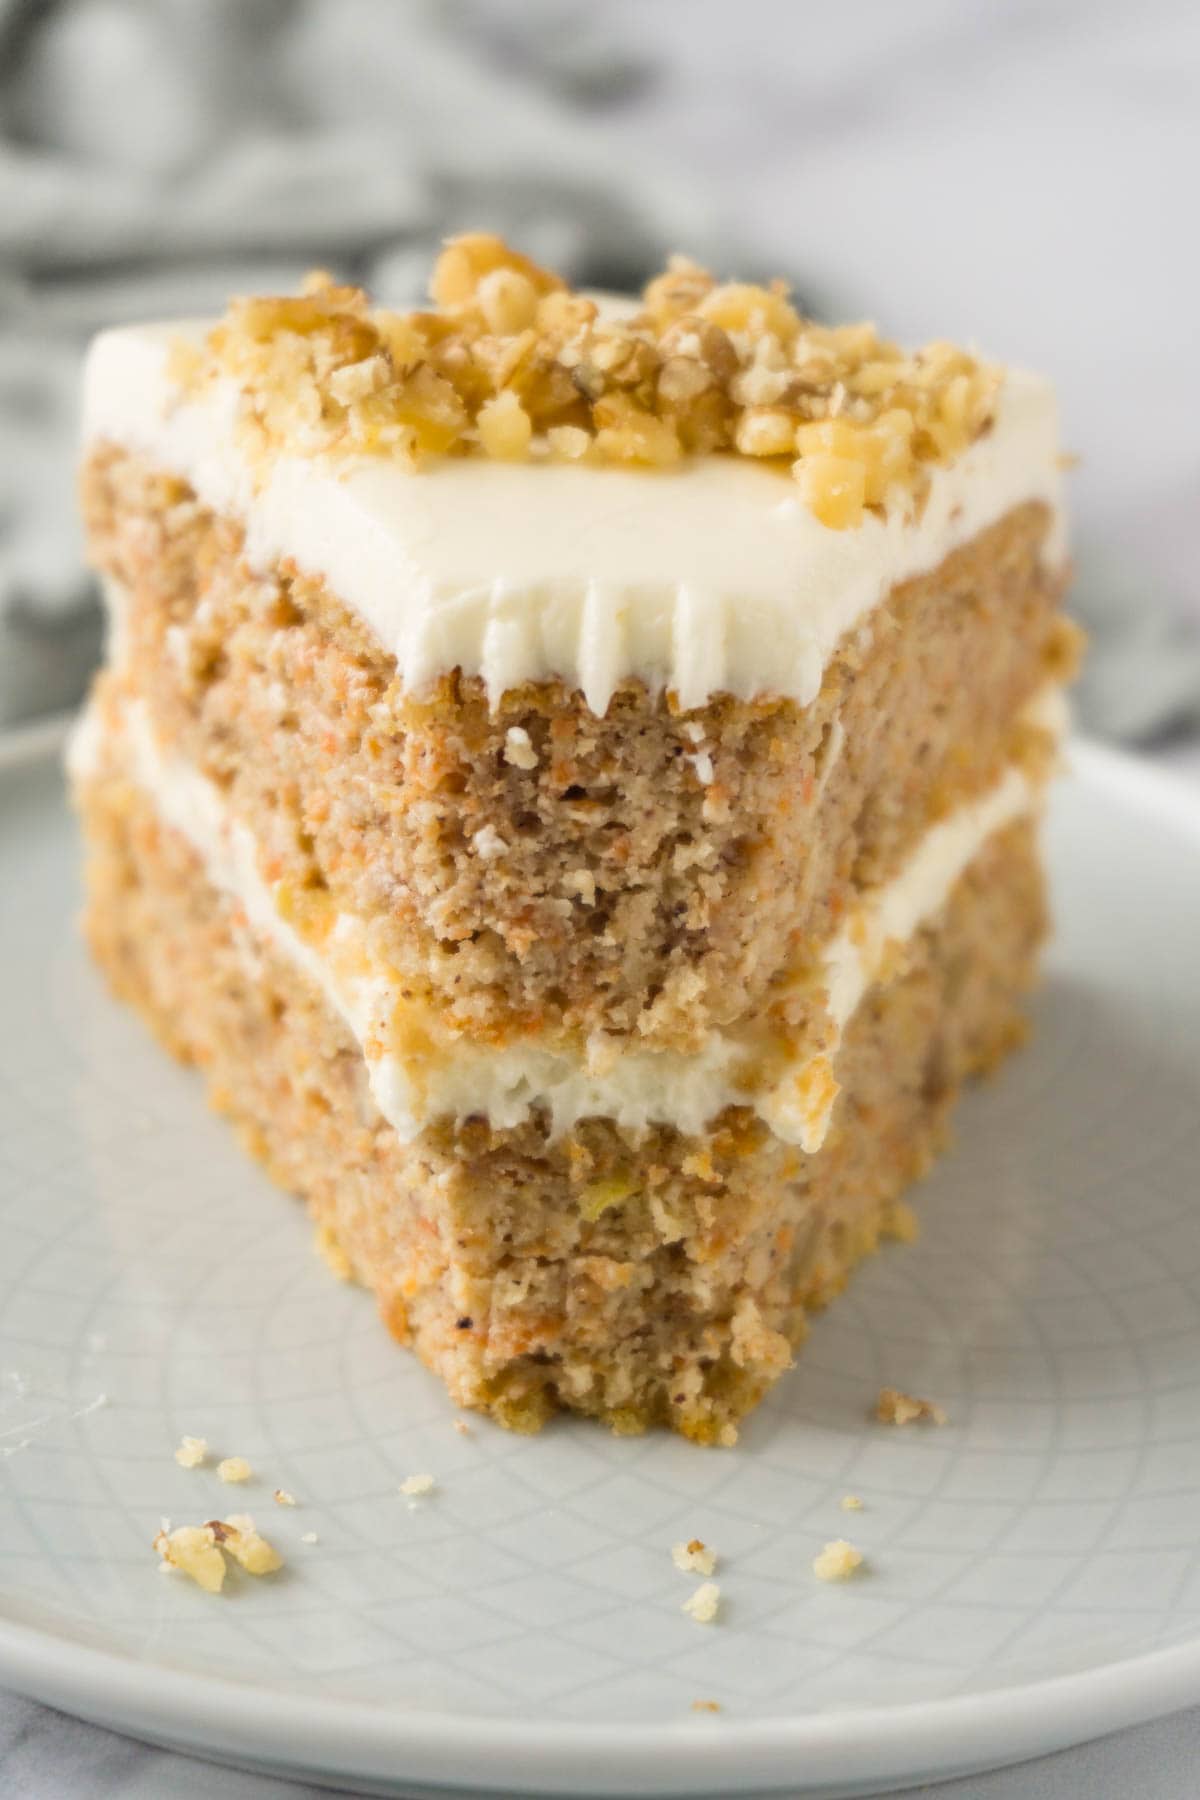 A piece of gluten-free carrot cake topped with walnuts, one bite taken.